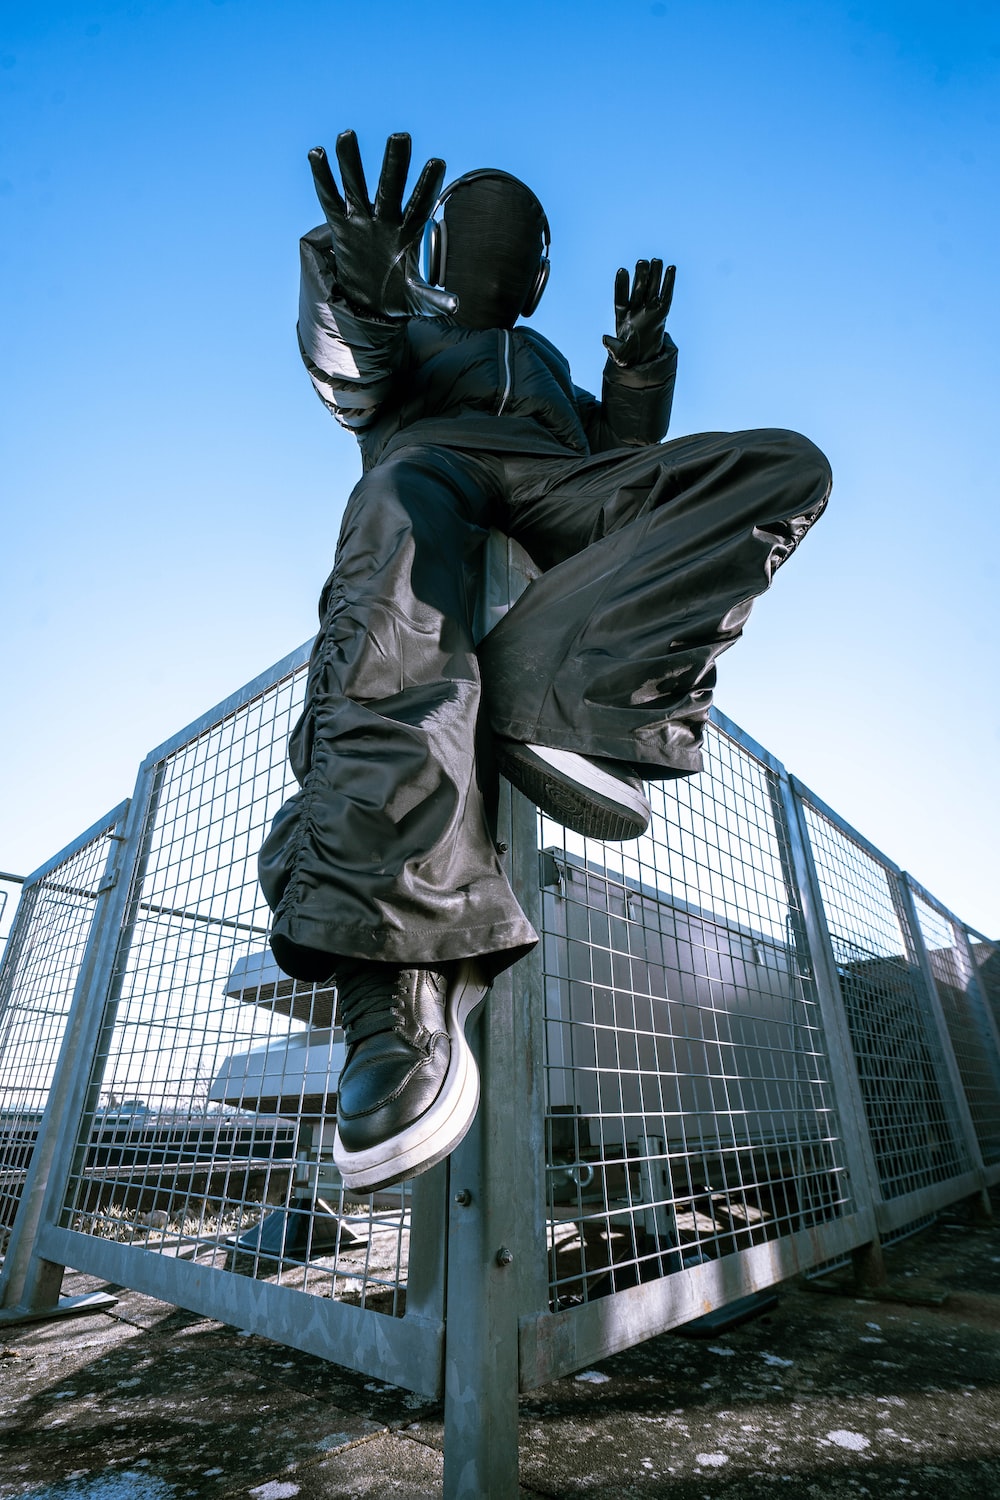 a statue of a person on a metal pole